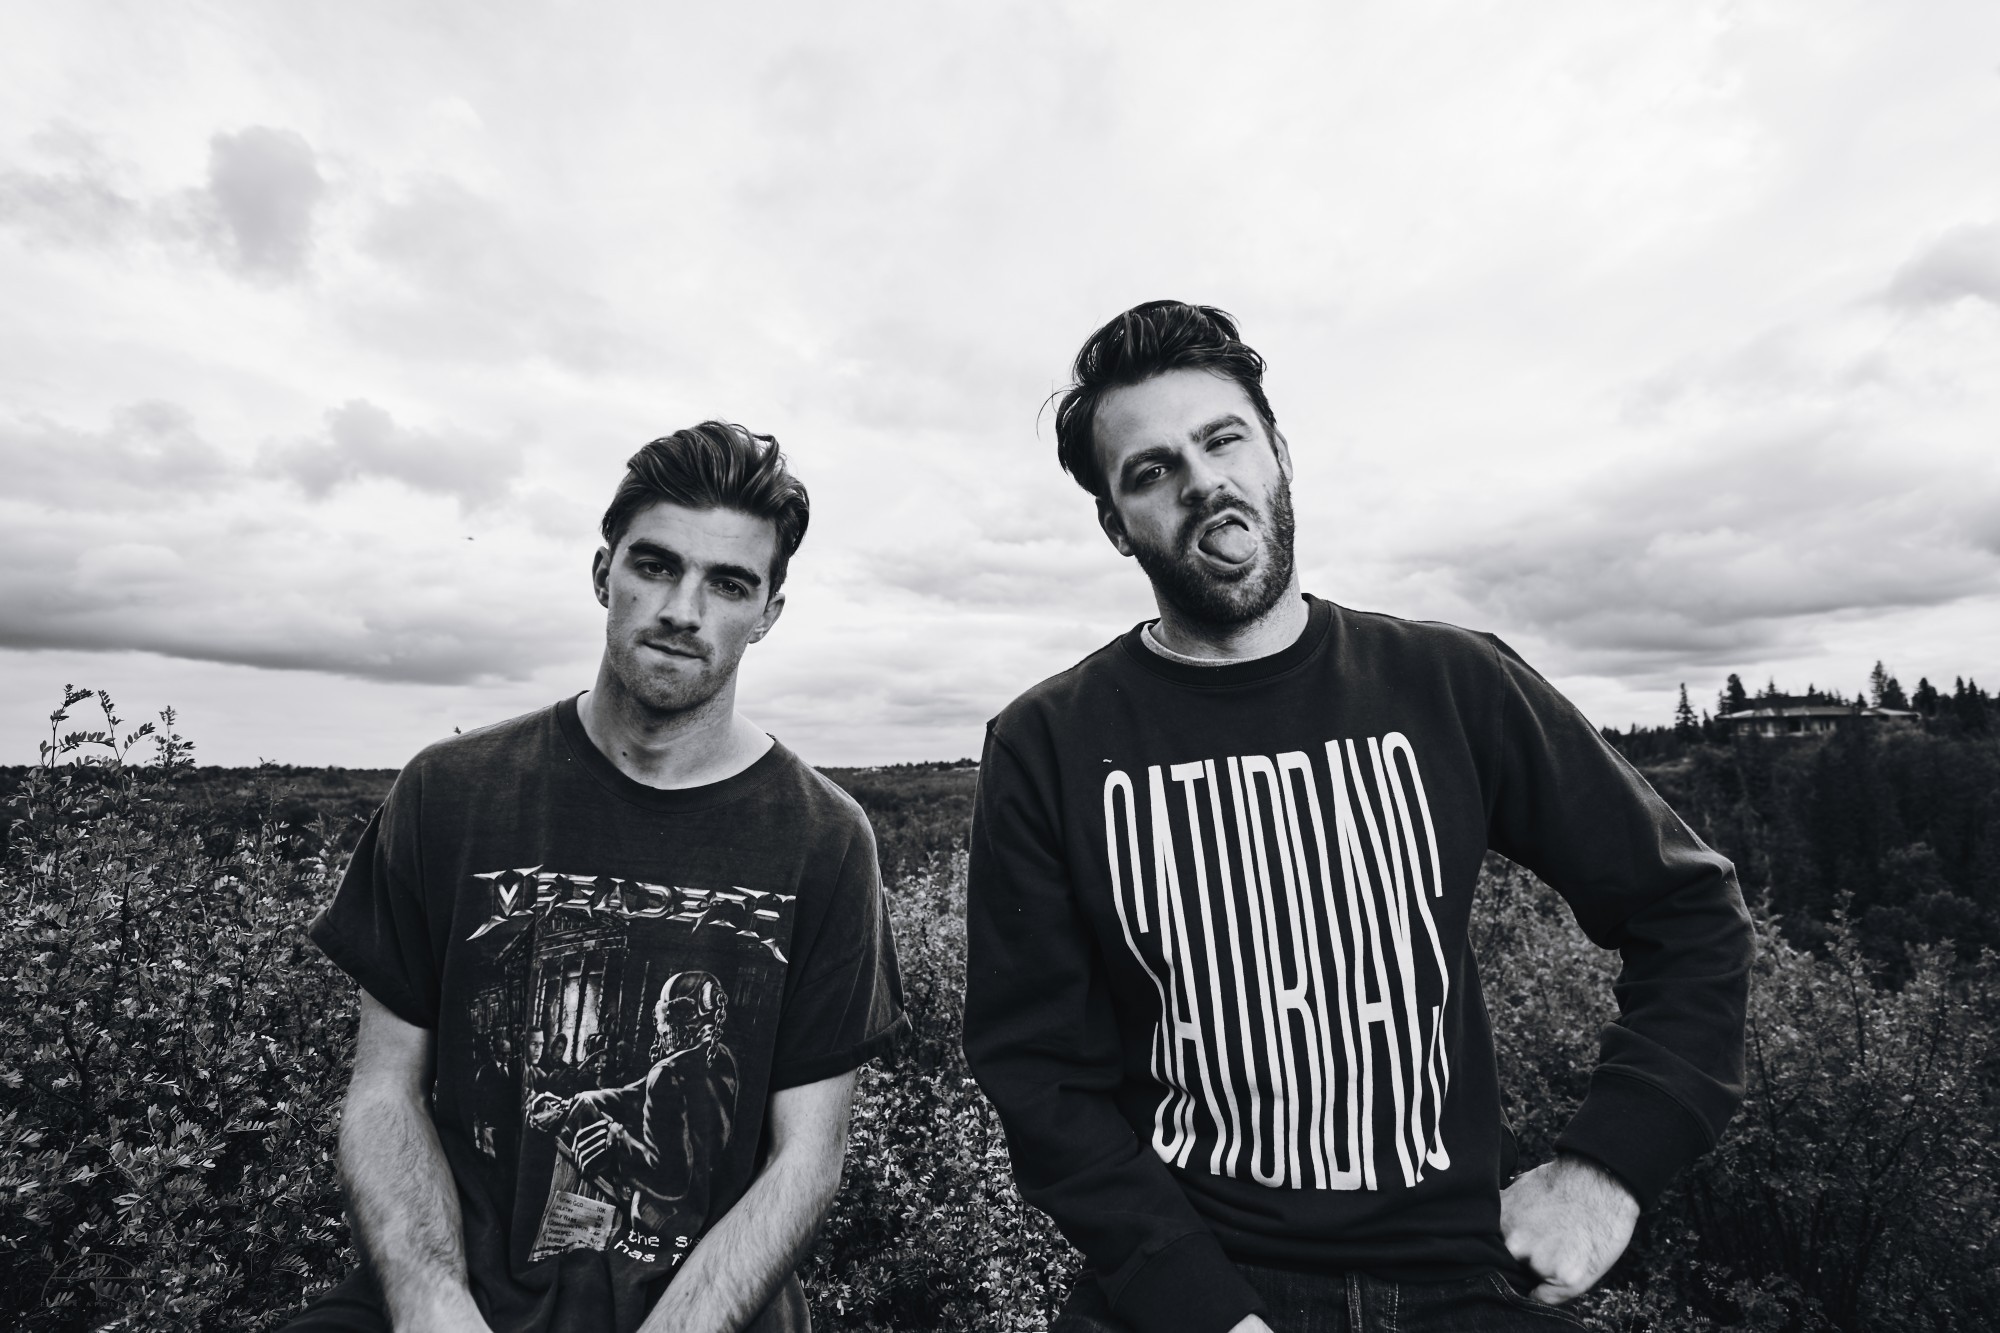 the chainsmokers wallpaper,people,black and white,photography,monochrome,friendship